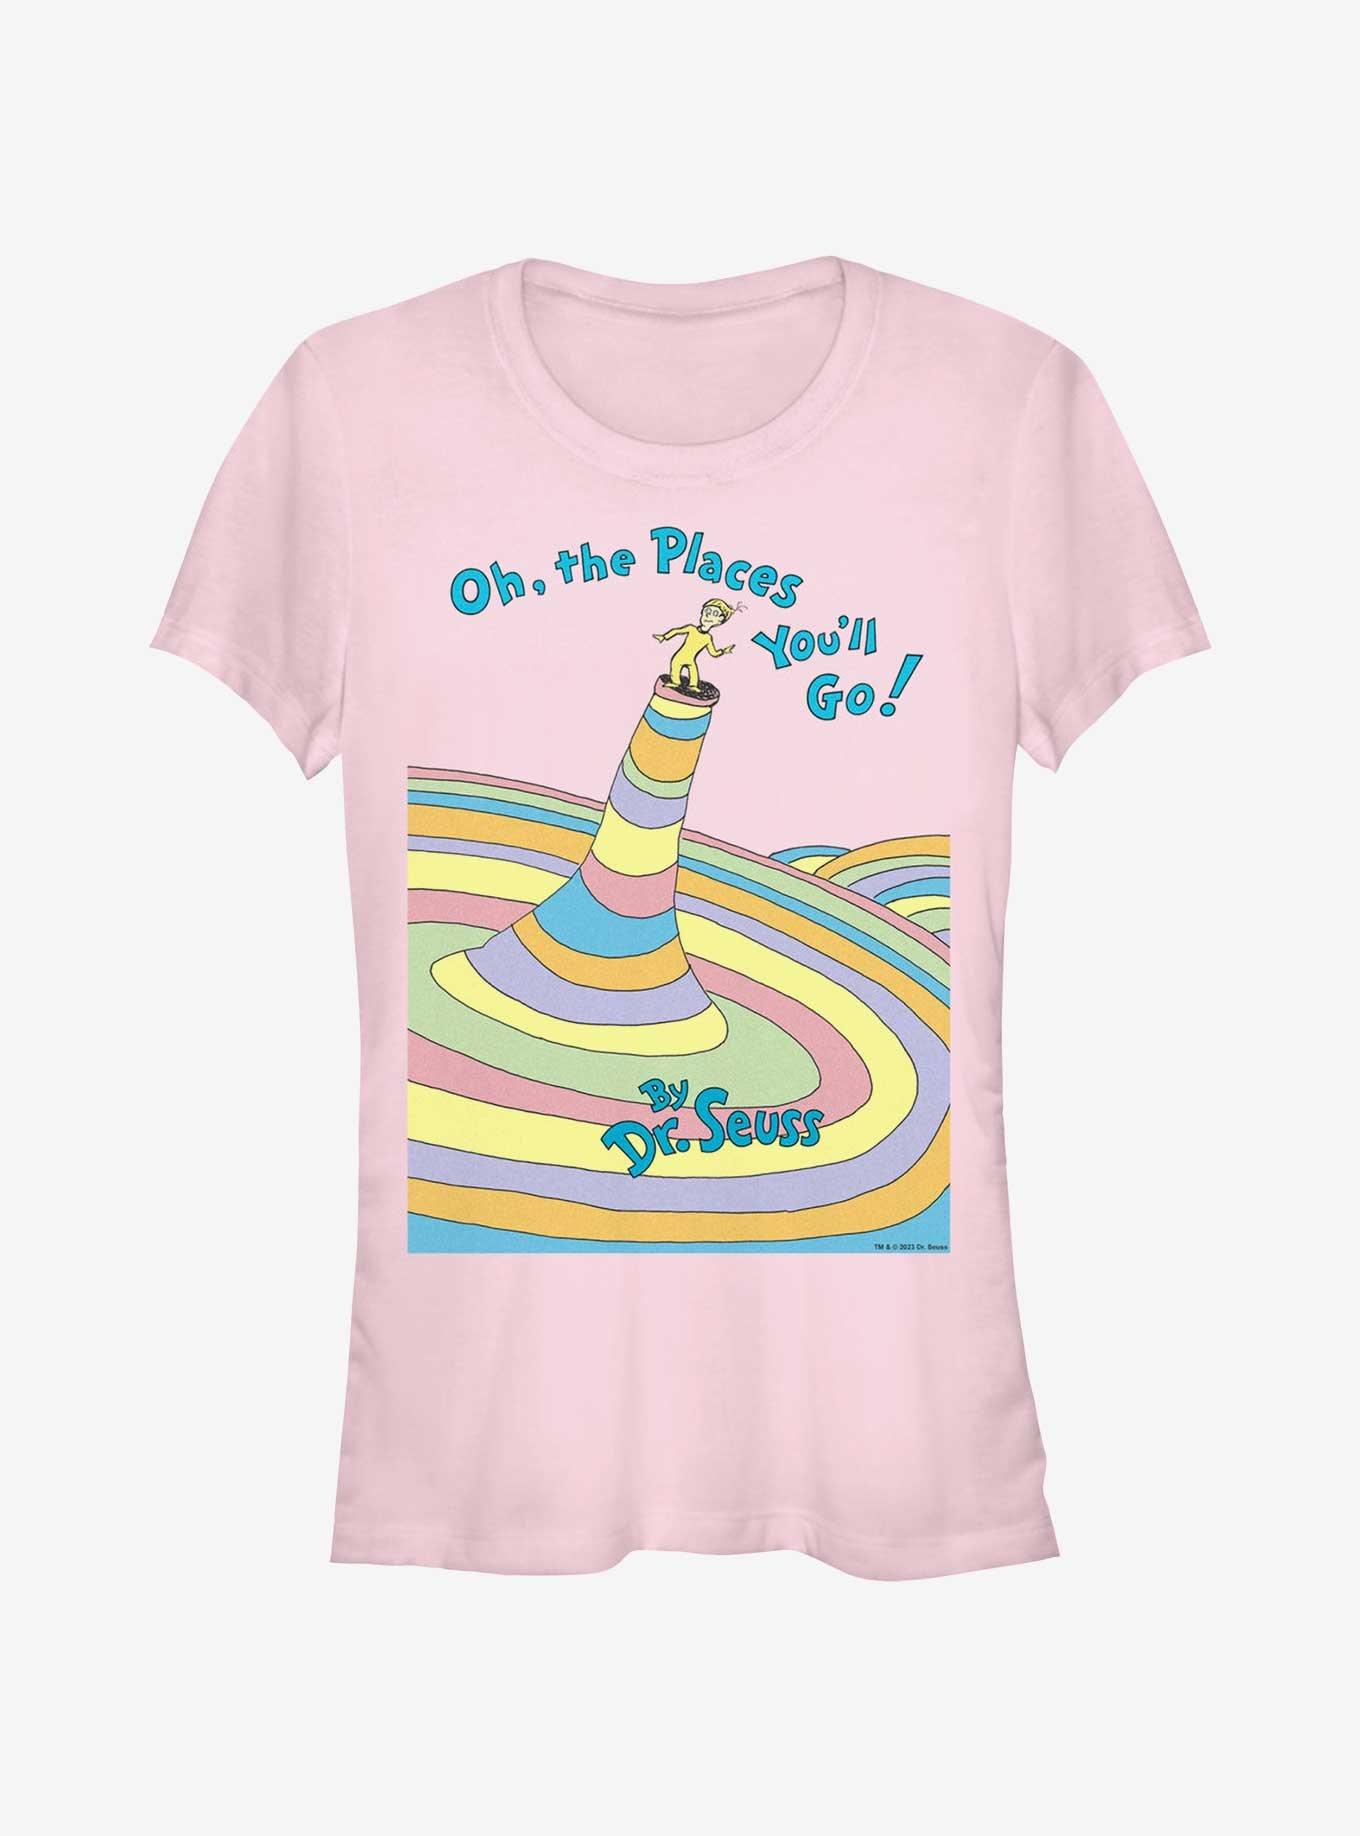 Dr. Seuss Oh The Places You'll Go Girls T-Shirt, LIGHT PINK, hi-res